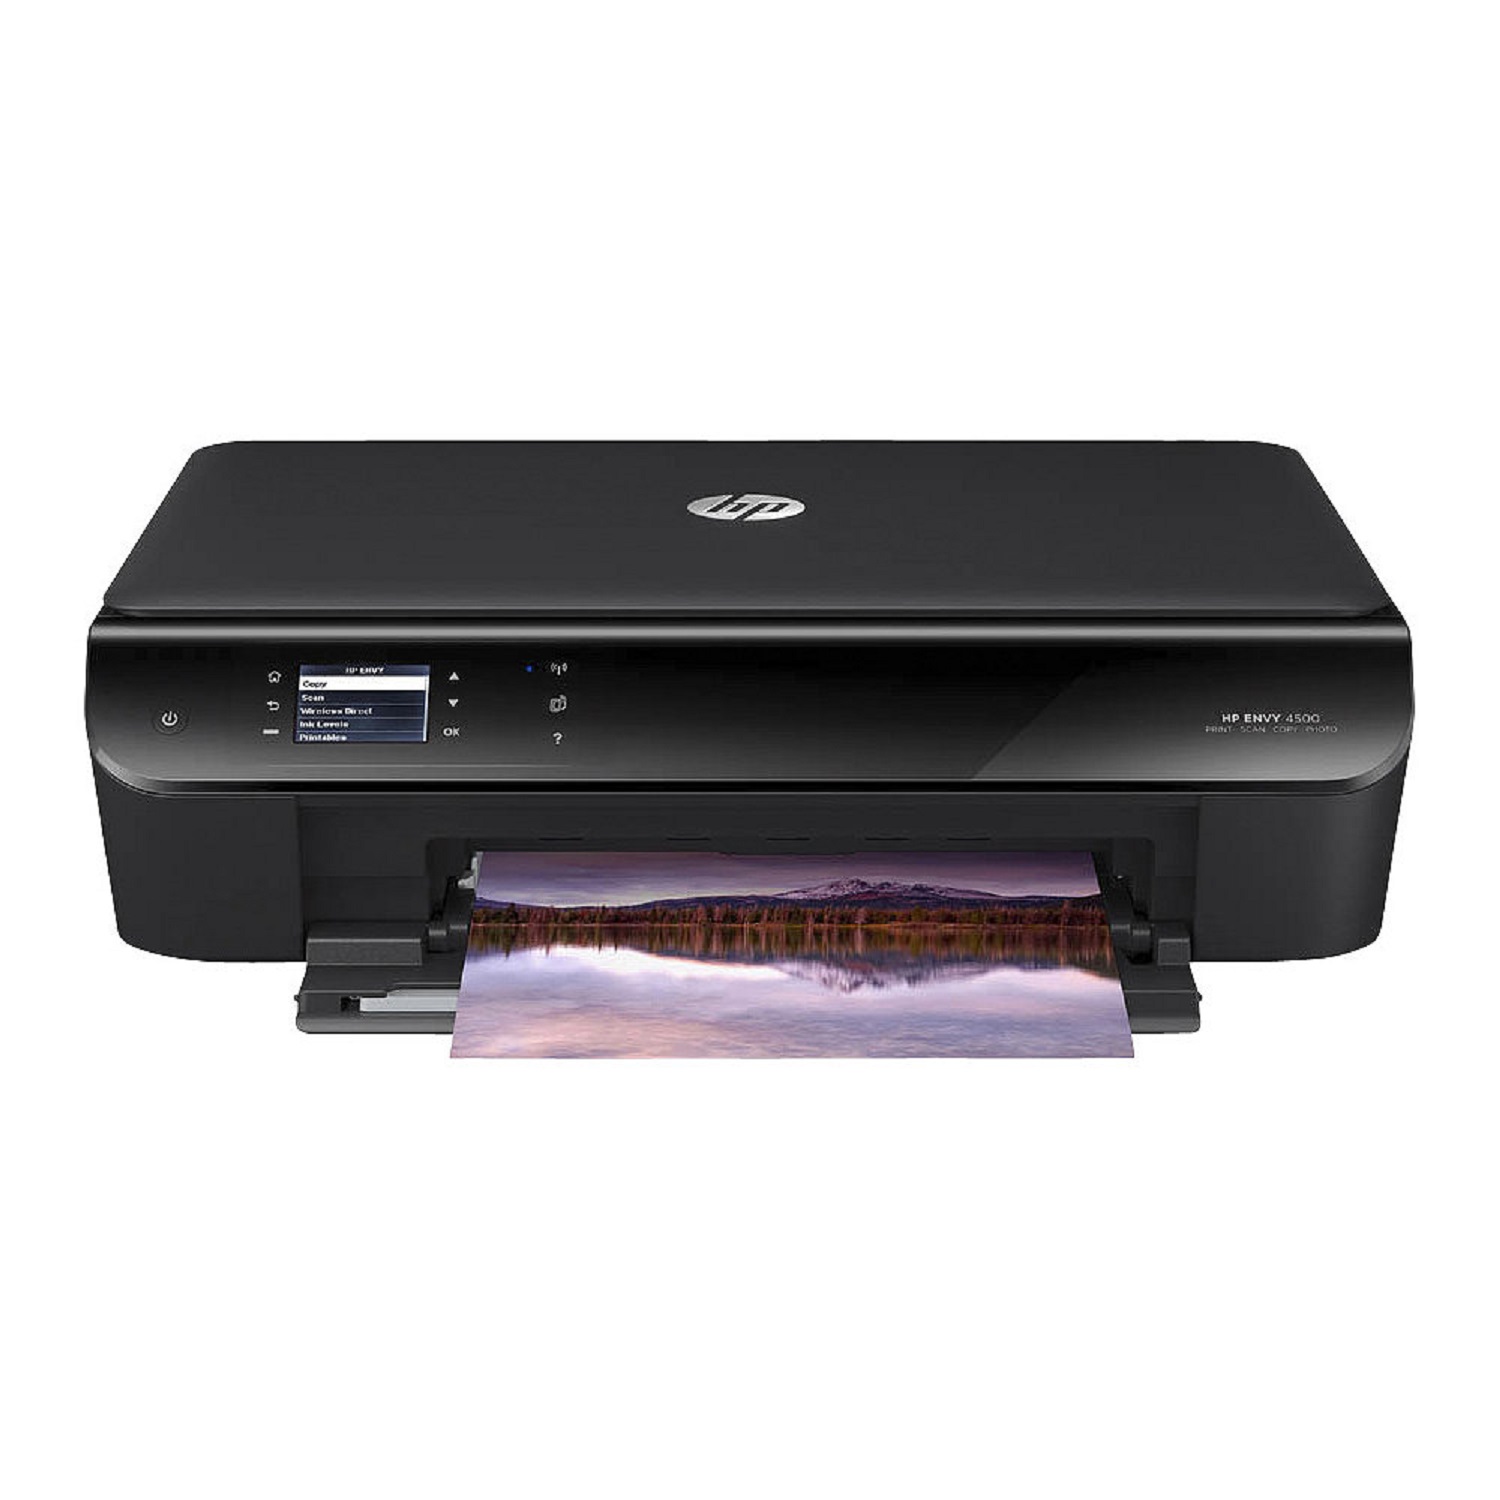 hp envy 4500 wireless color photo printer with scanner and copier for mac